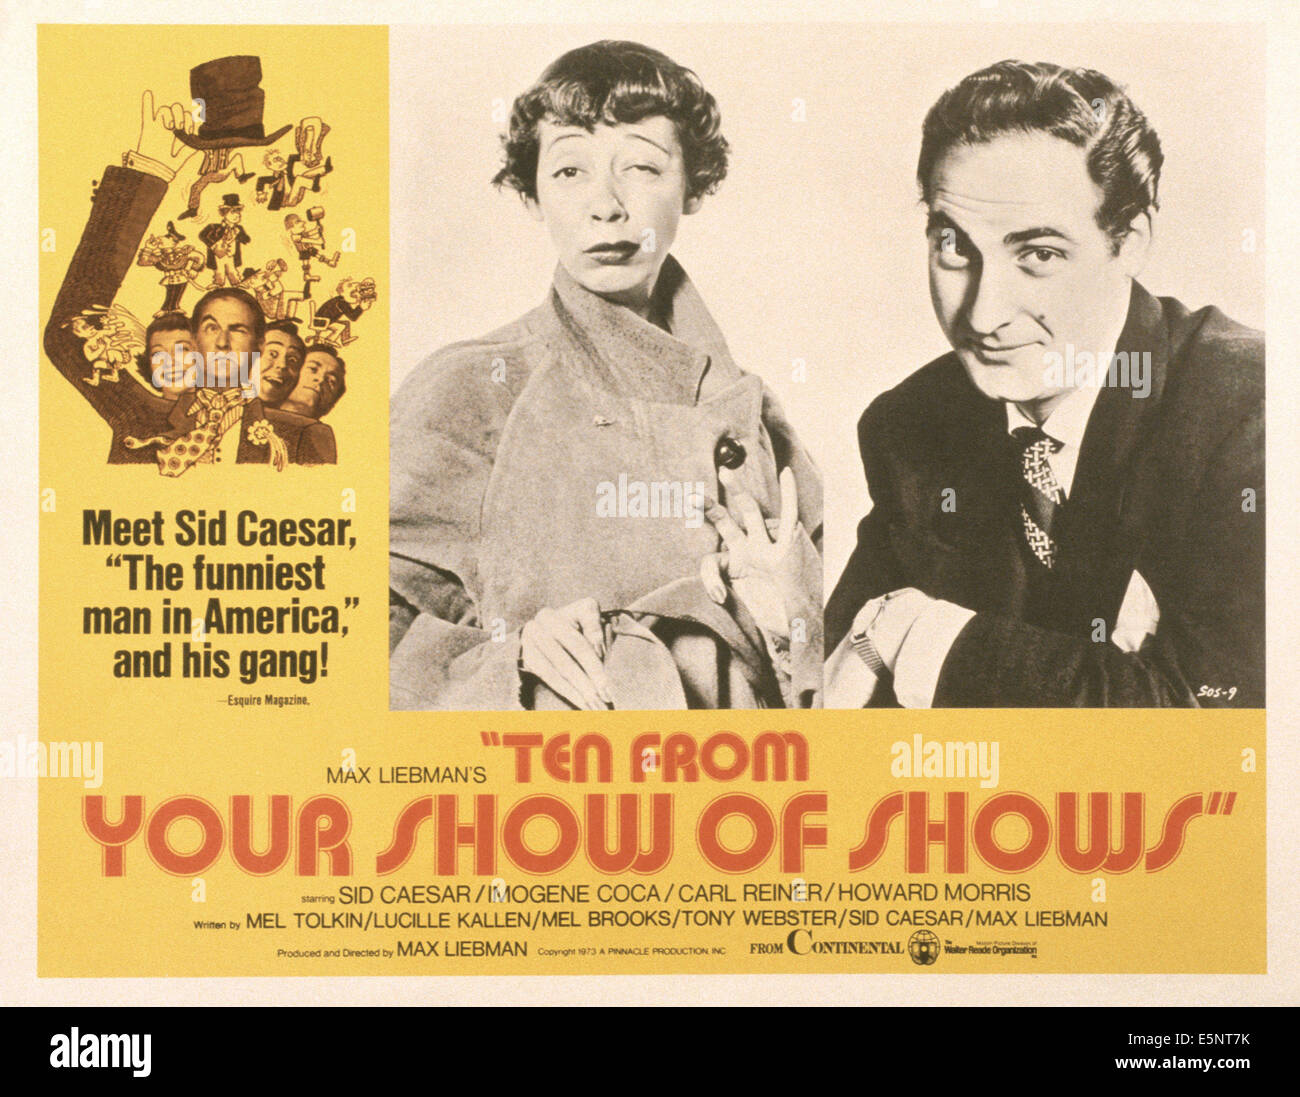 TEN FROM YOUR SHOW OF SHOWS, (aka 10 FROM YOUR SHOW OF SHOWS), US lobbycard, from left: Imogene Coca, Sid Caesar, Carl Reiner, Stock Photo